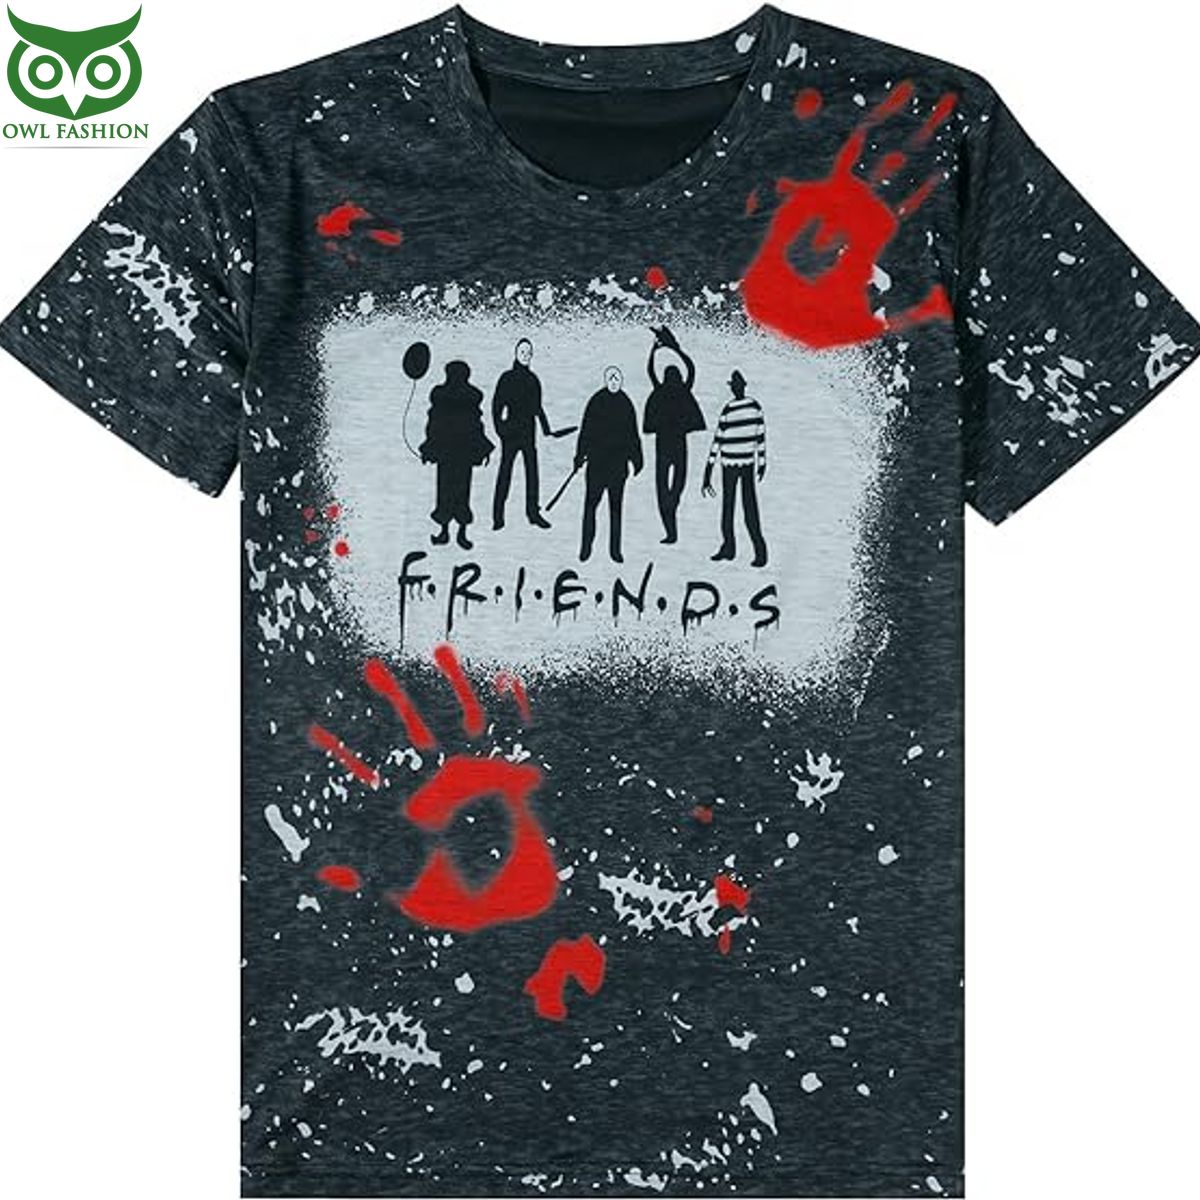 Halloween t Shirt Women Funny Friends Party Horror Characters Graphic shop owl fashion